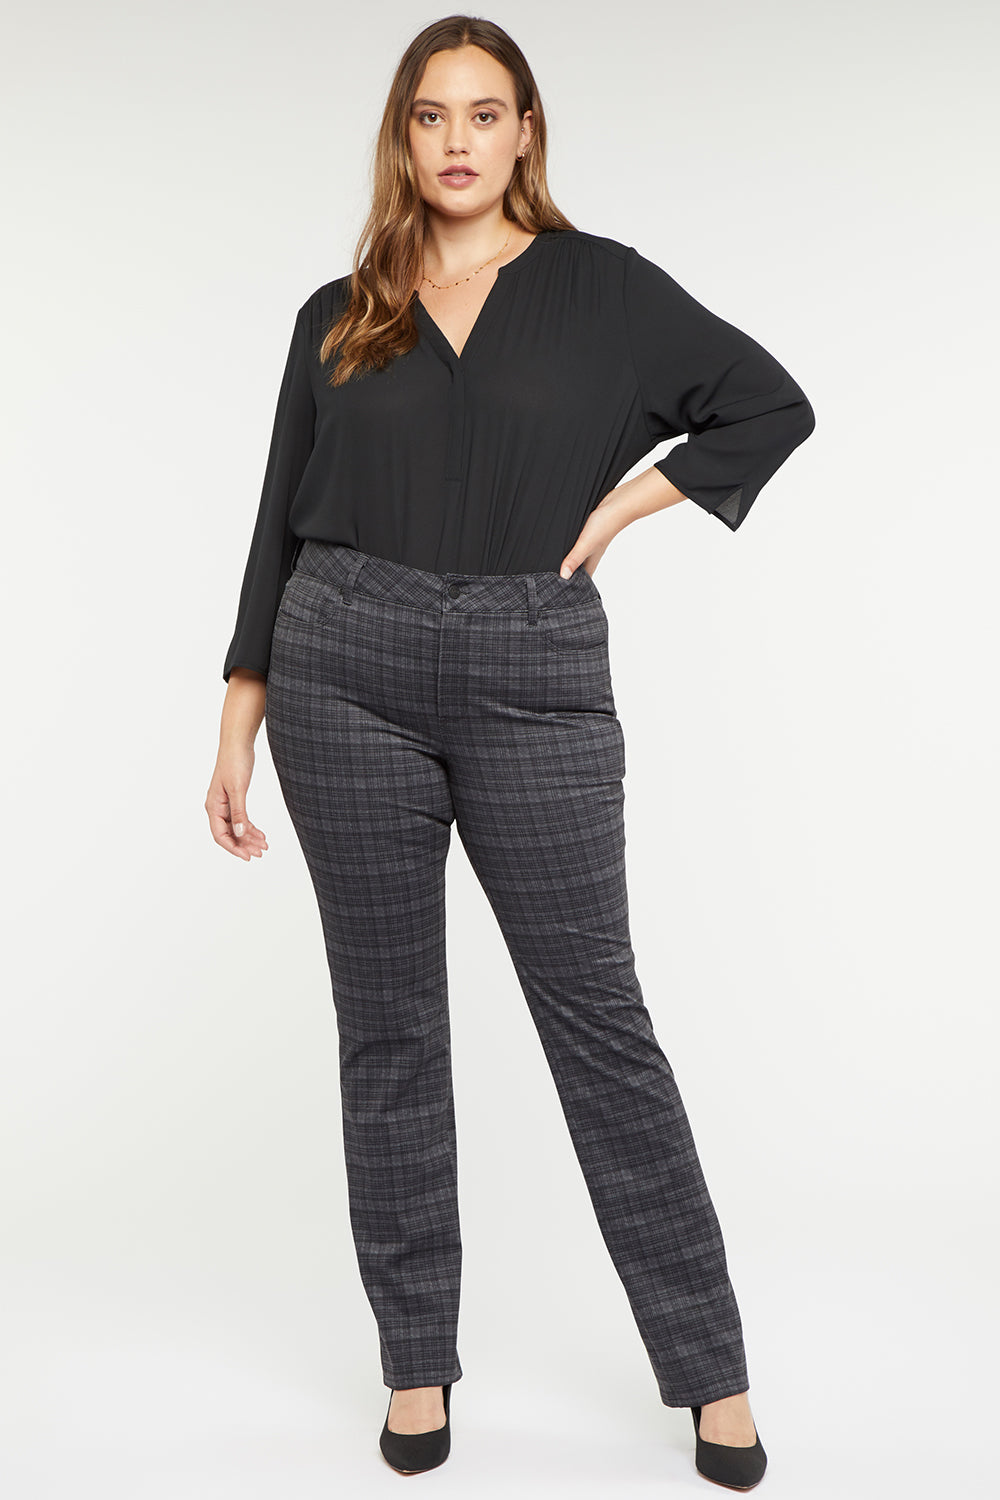 Marilyn Straight Pants In Plus Size In Ponte Knit - Hudson Plaid Grey ...